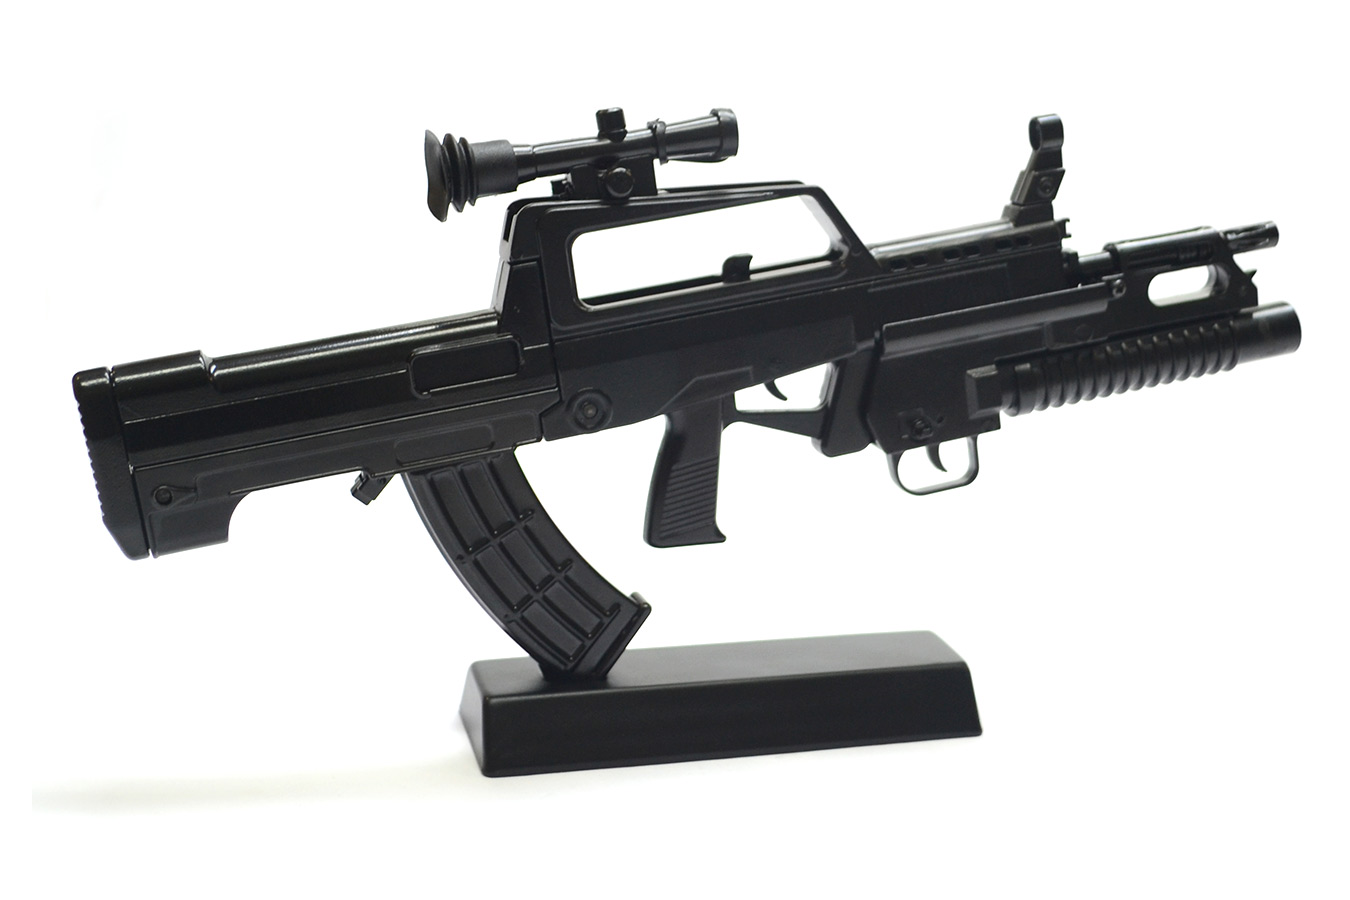 Model assault rifle QBZ-95 / Type 95 on a scale of 1: 3